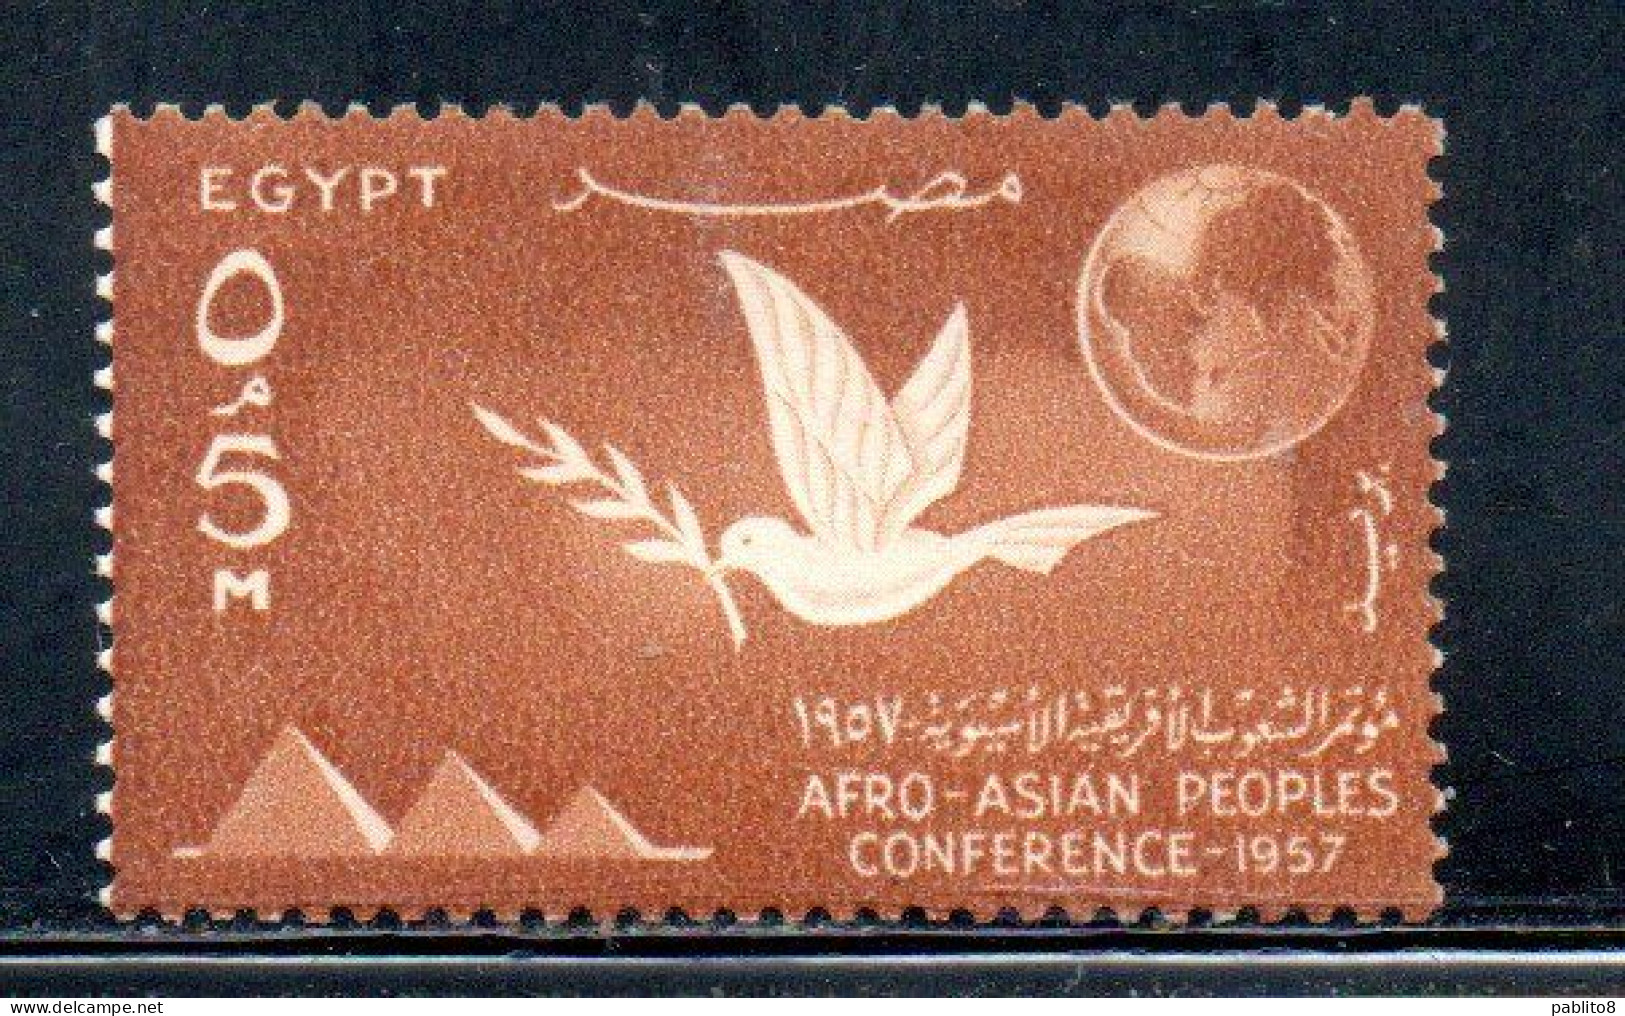 UAR EGYPT EGITTO 1957 AFRO-ASIAN PEOPLES CONFERENCE CAIRO PYRAMIDS DOVE AND GLOBE 5m MNH - Ungebraucht